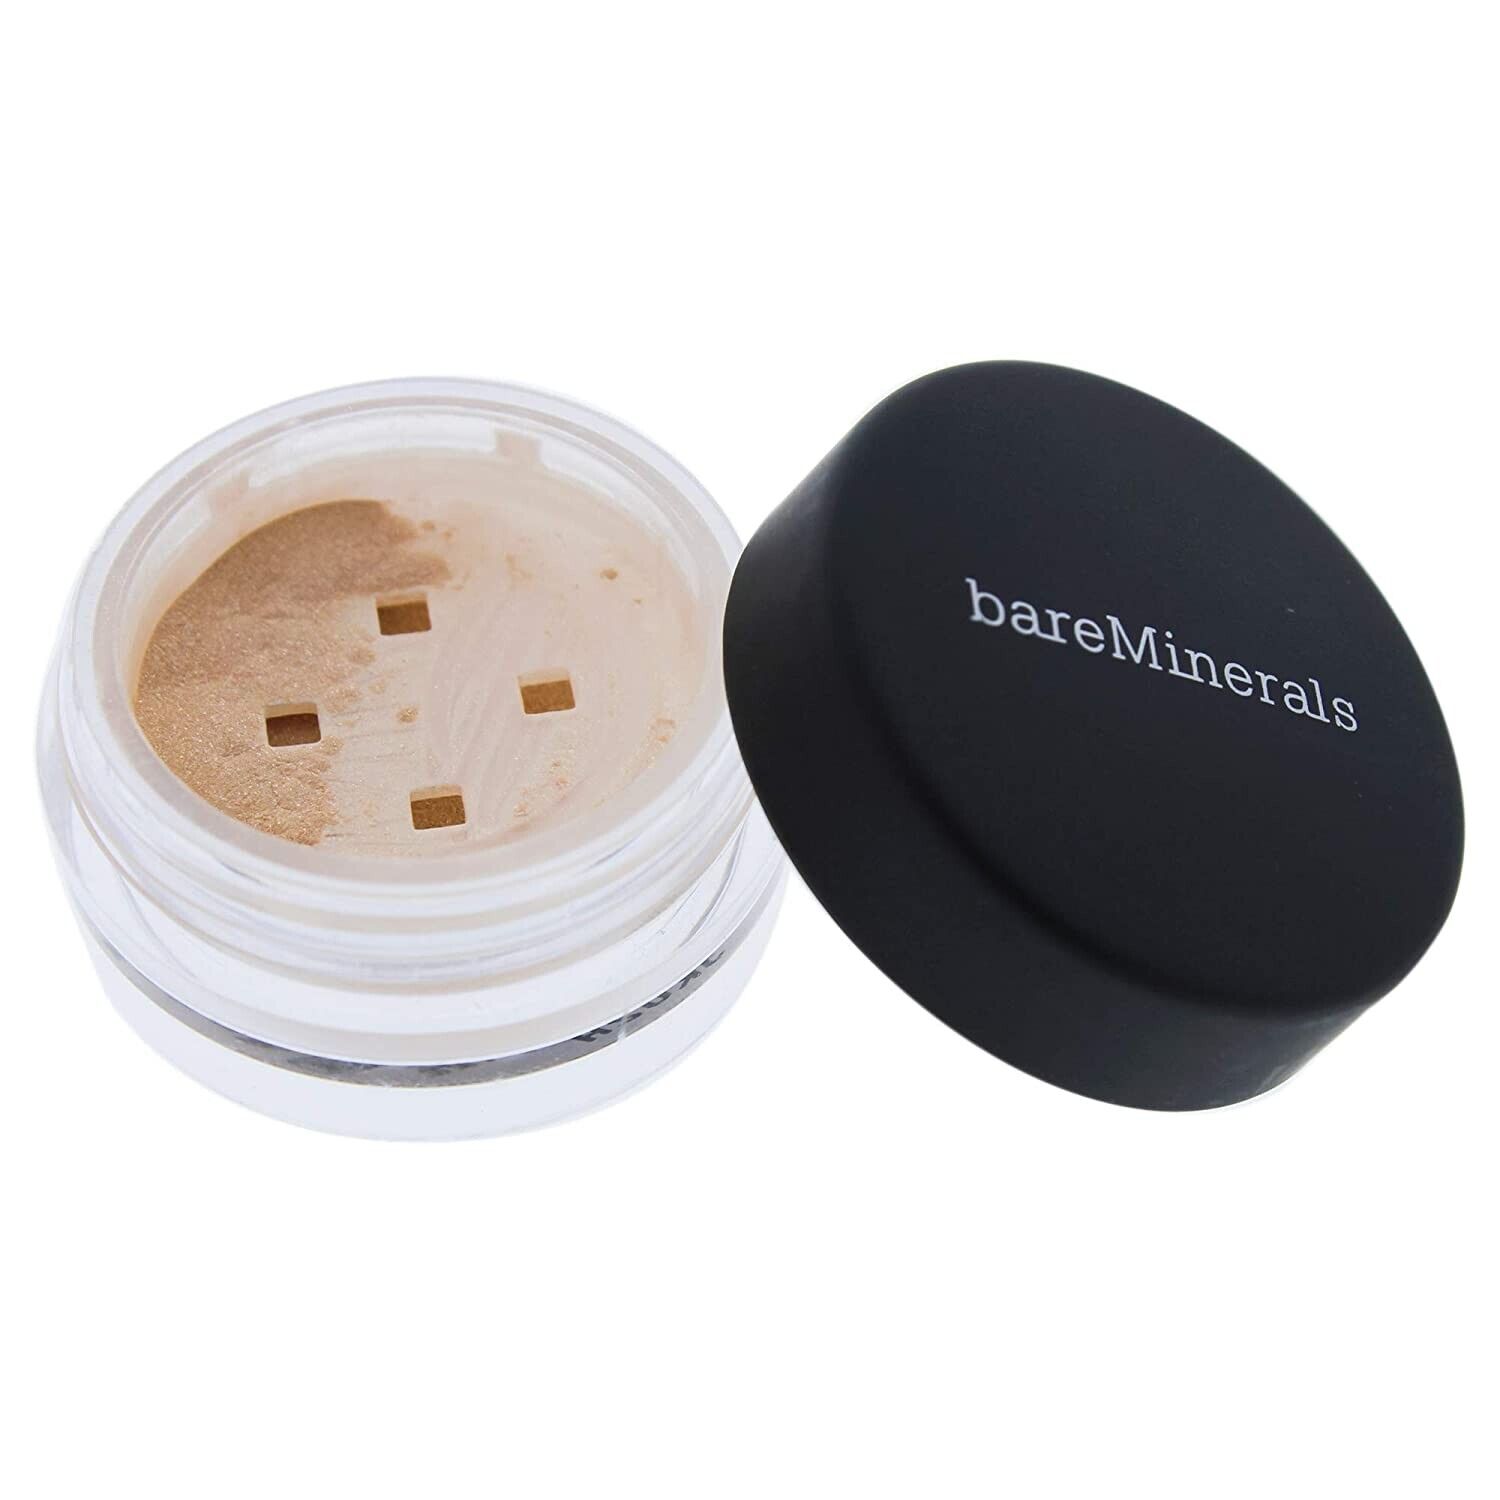 BAREMINERALS ALL-OVER FACE COLOR - FLAWLESS RADIANCE 0.02 OZ